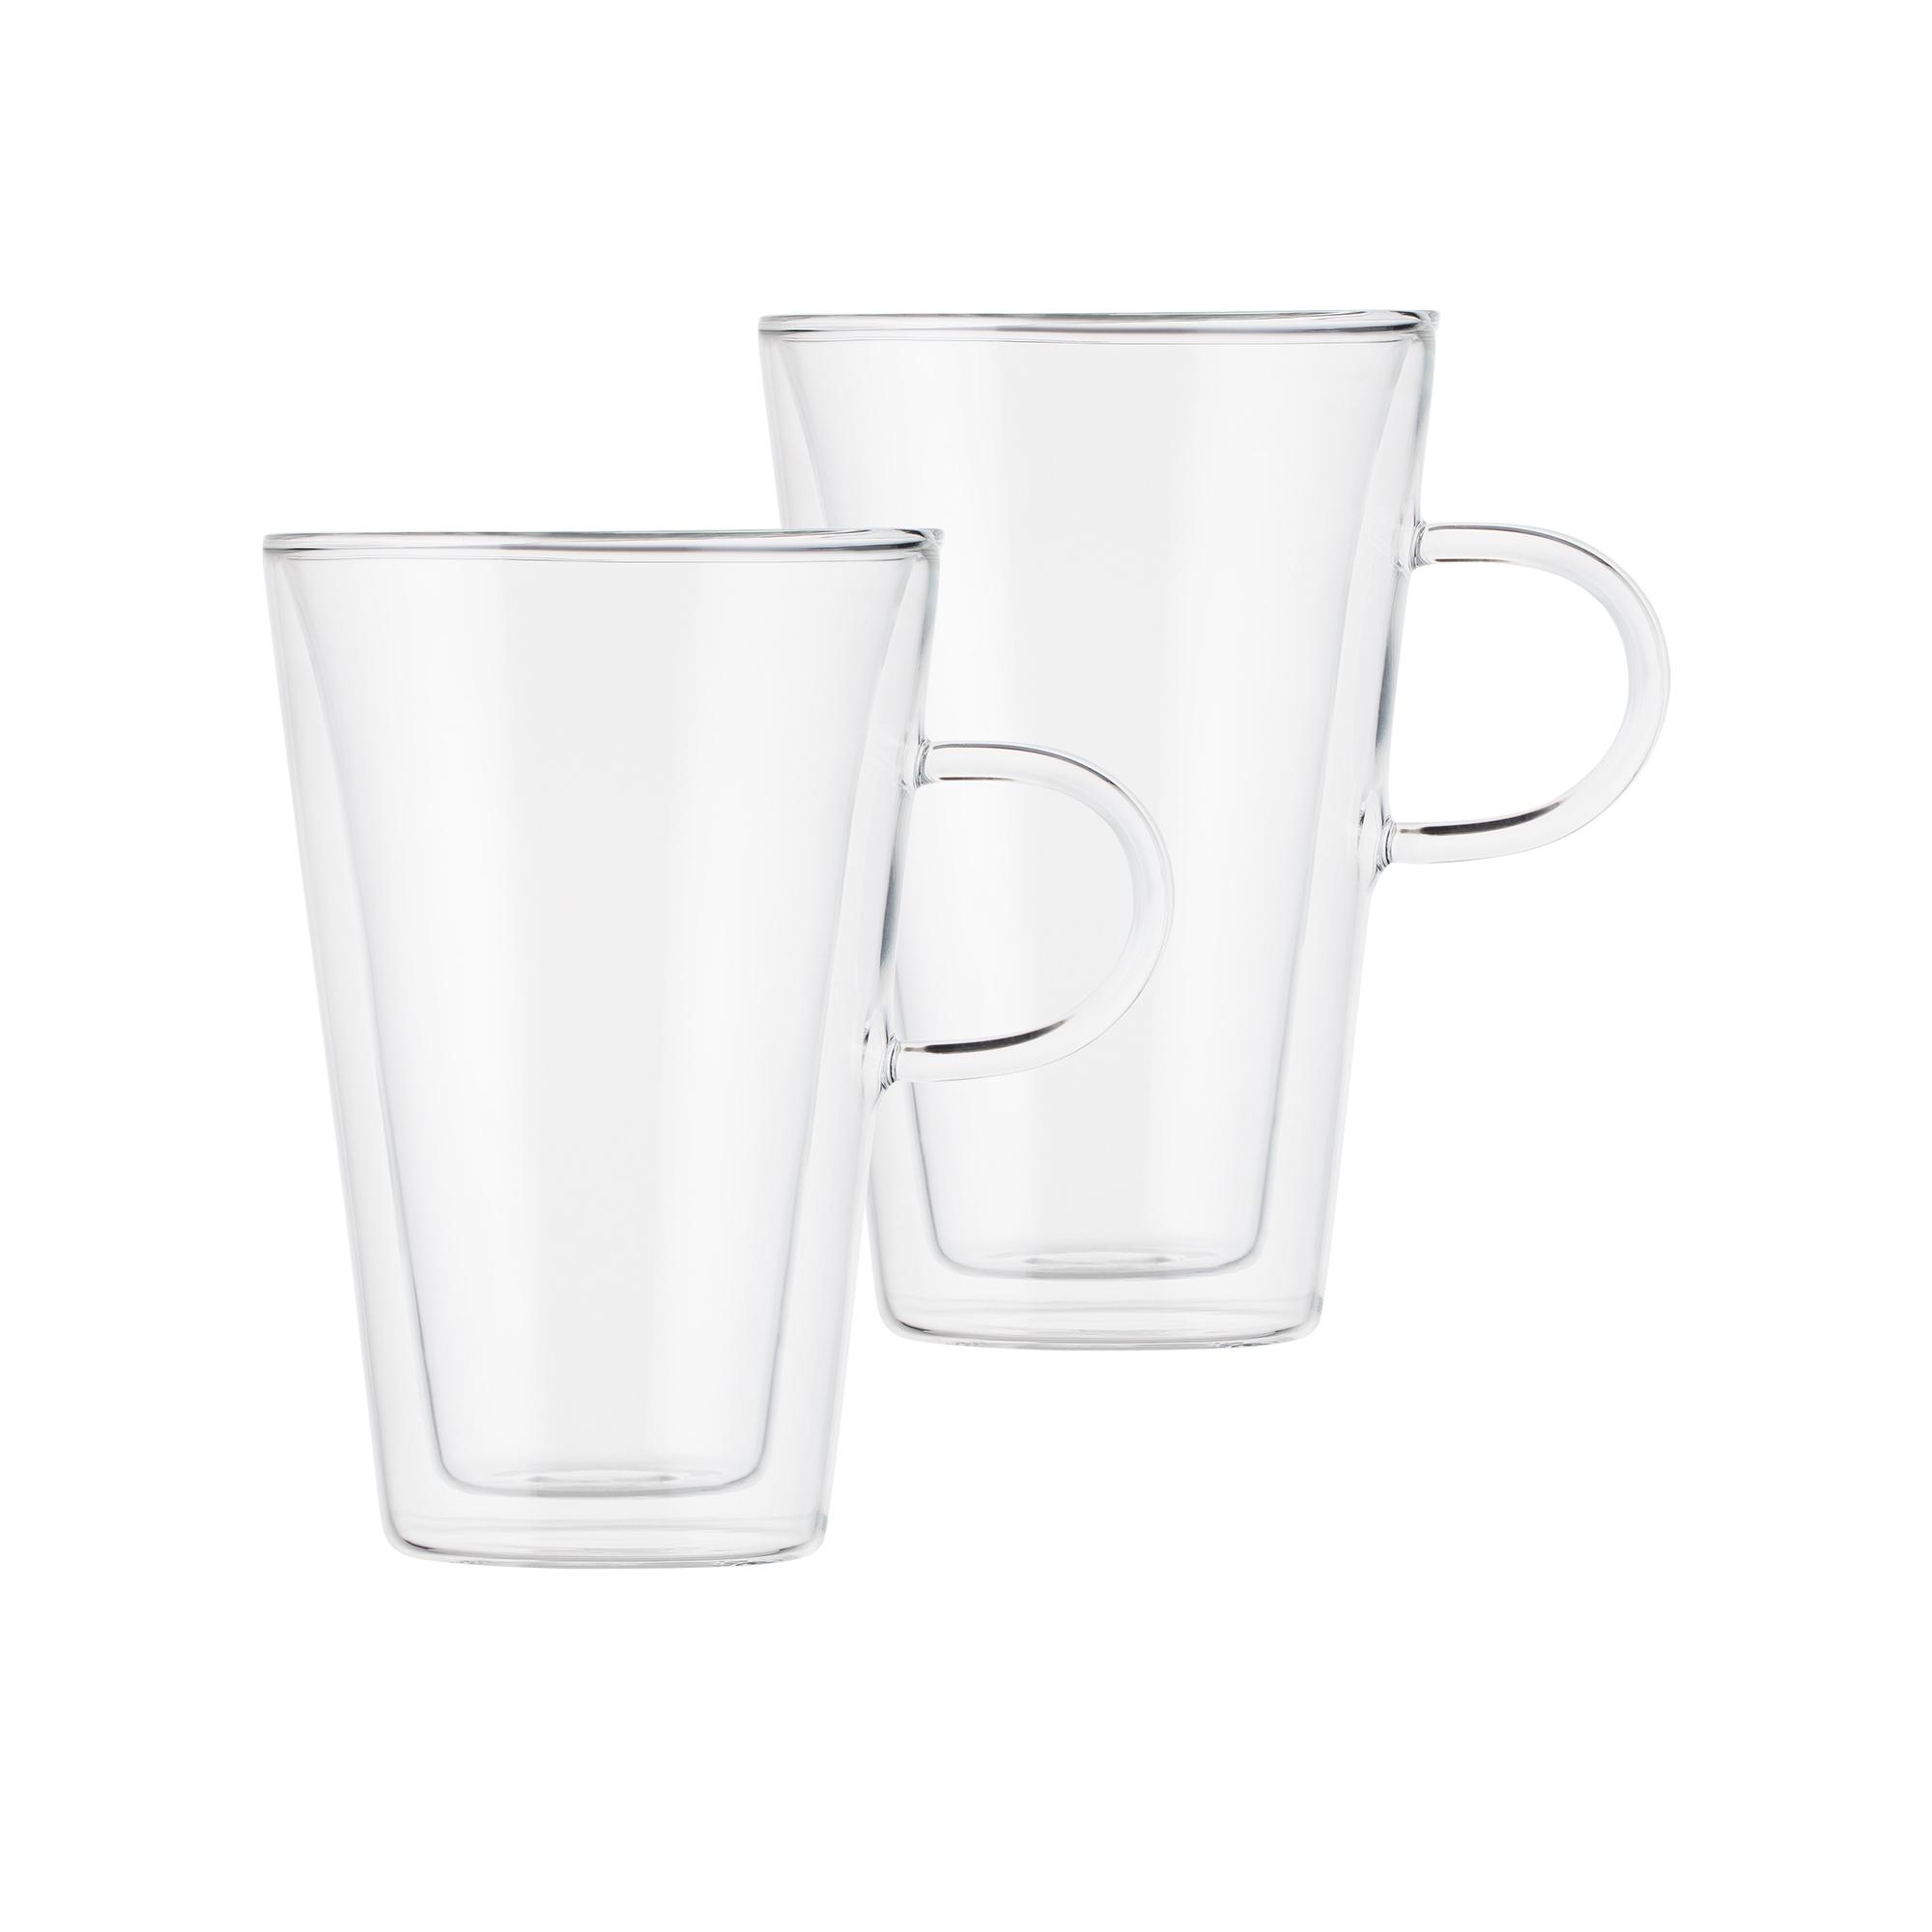 Bodum Canteen Double Wall Cup 400ml Set of 2 Image 4